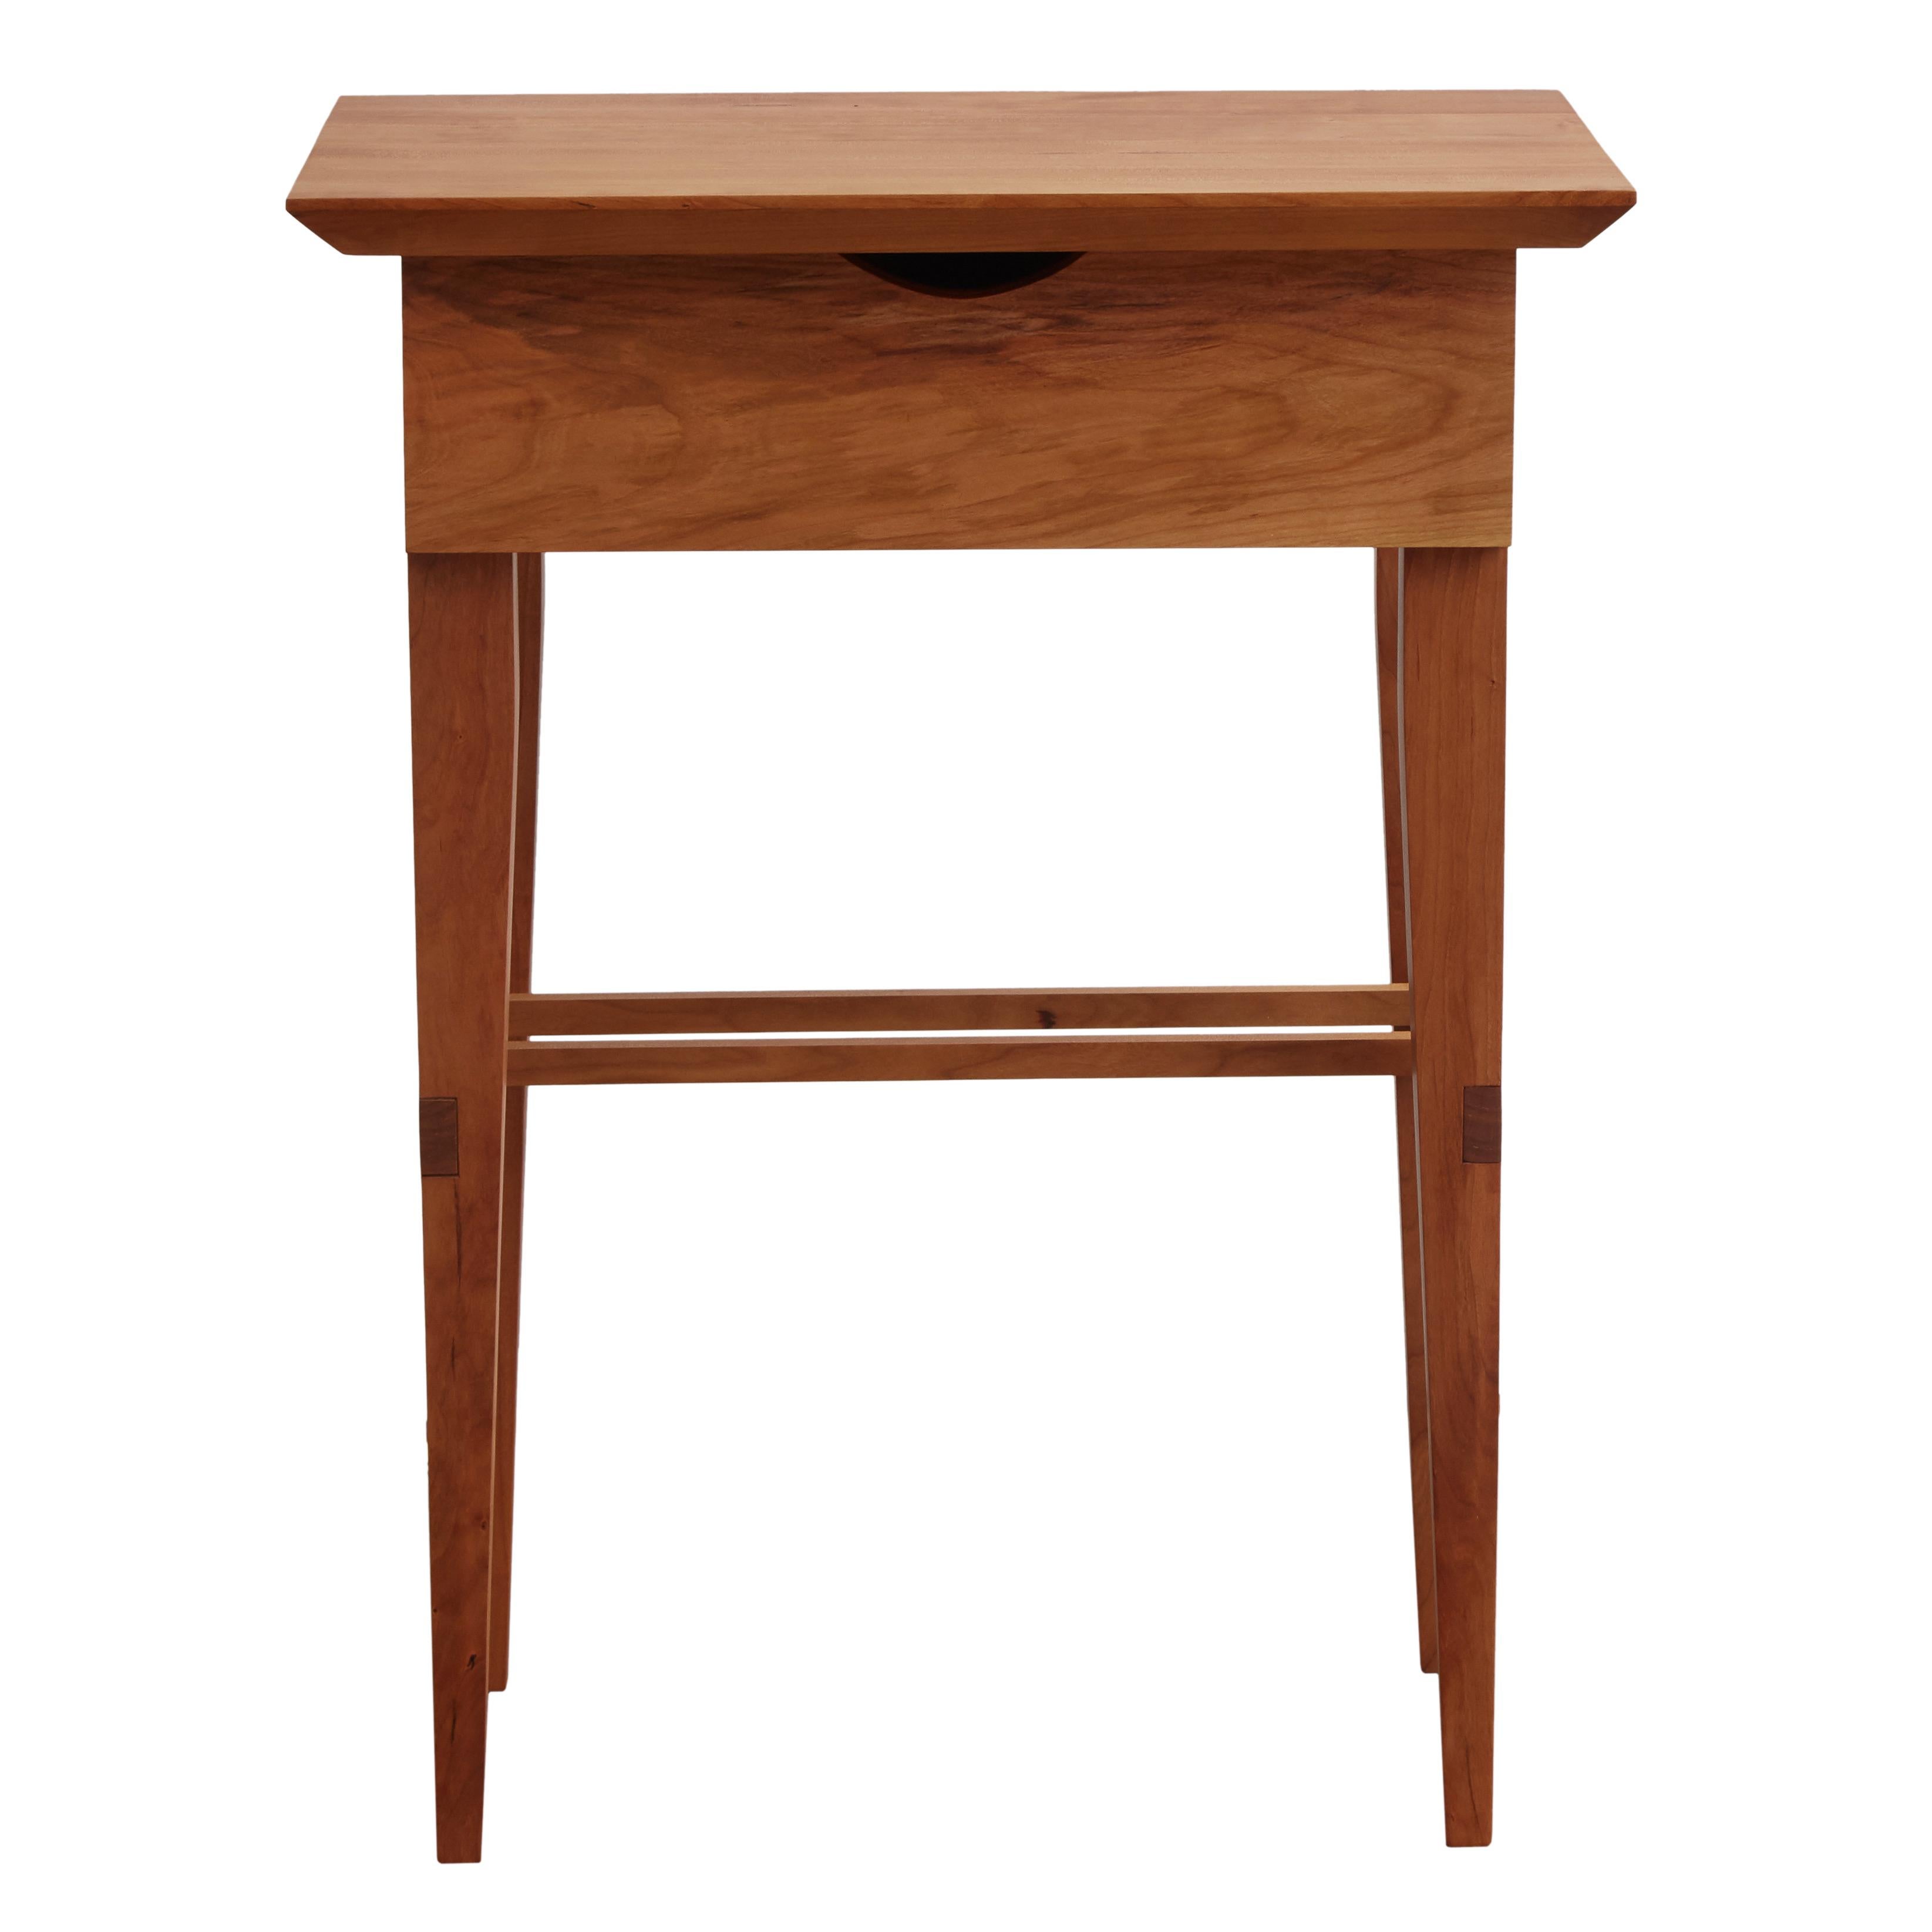 The Camilla Side Table compliments contemporary, mid-century and Shaker design, and is suitable as a nightstand, end table, or sofa table. Each joinery-intensive piece has a small solid wood slatted bottom pen drawer and book shelf, and is sold